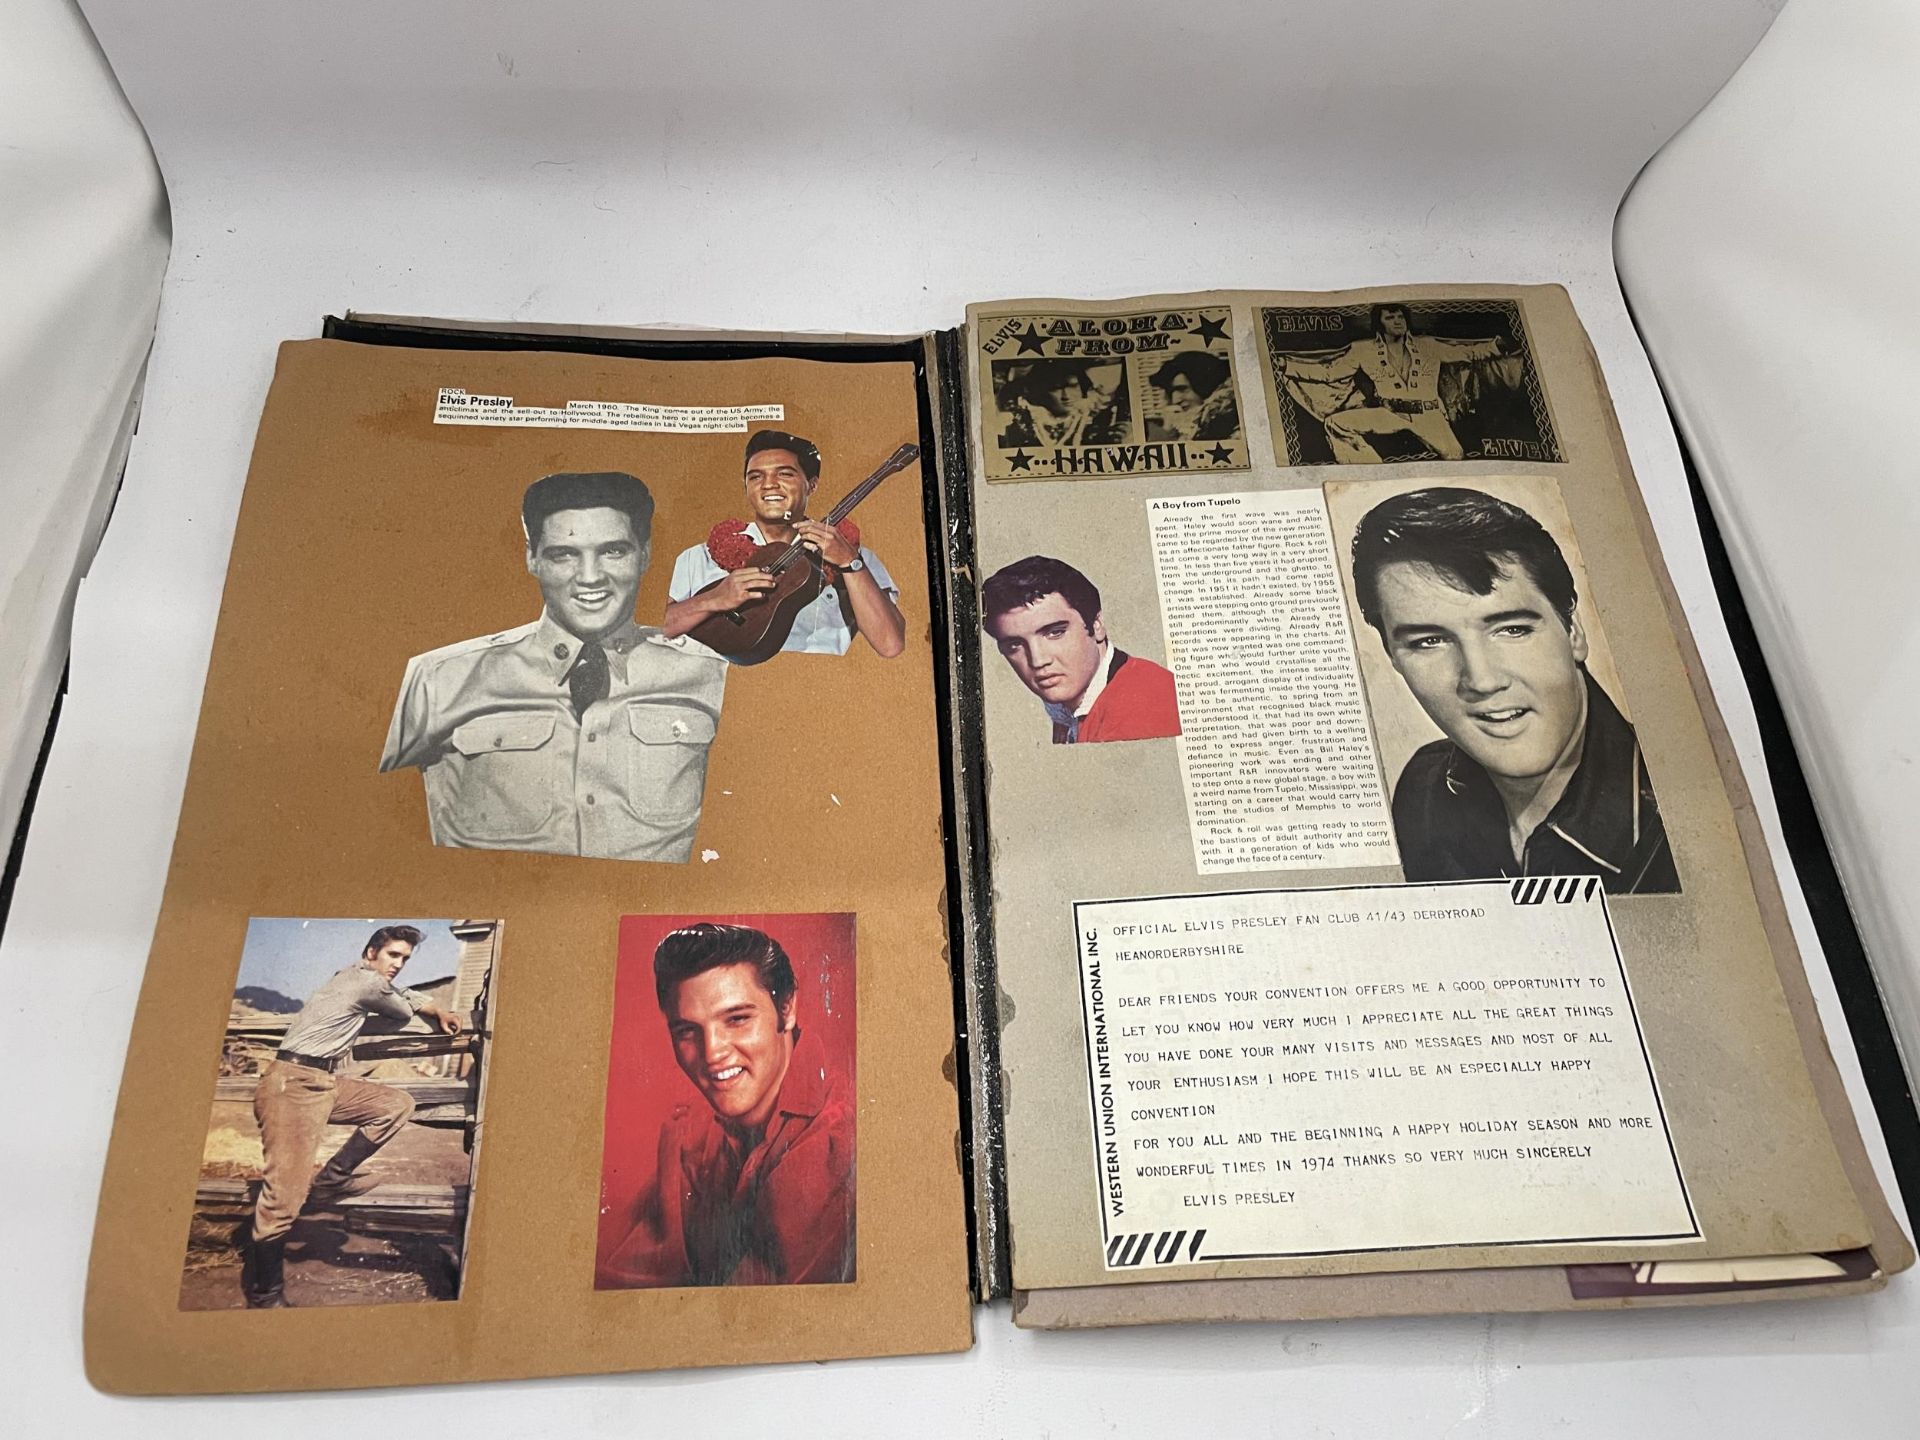 A 1970'S ELVIS PRESLEY AUTOGRAPH FROM AN ELVIS PRESLEY SCRAP BOOK - BELIEVED AUTHENTIC BUT NO - Image 2 of 5